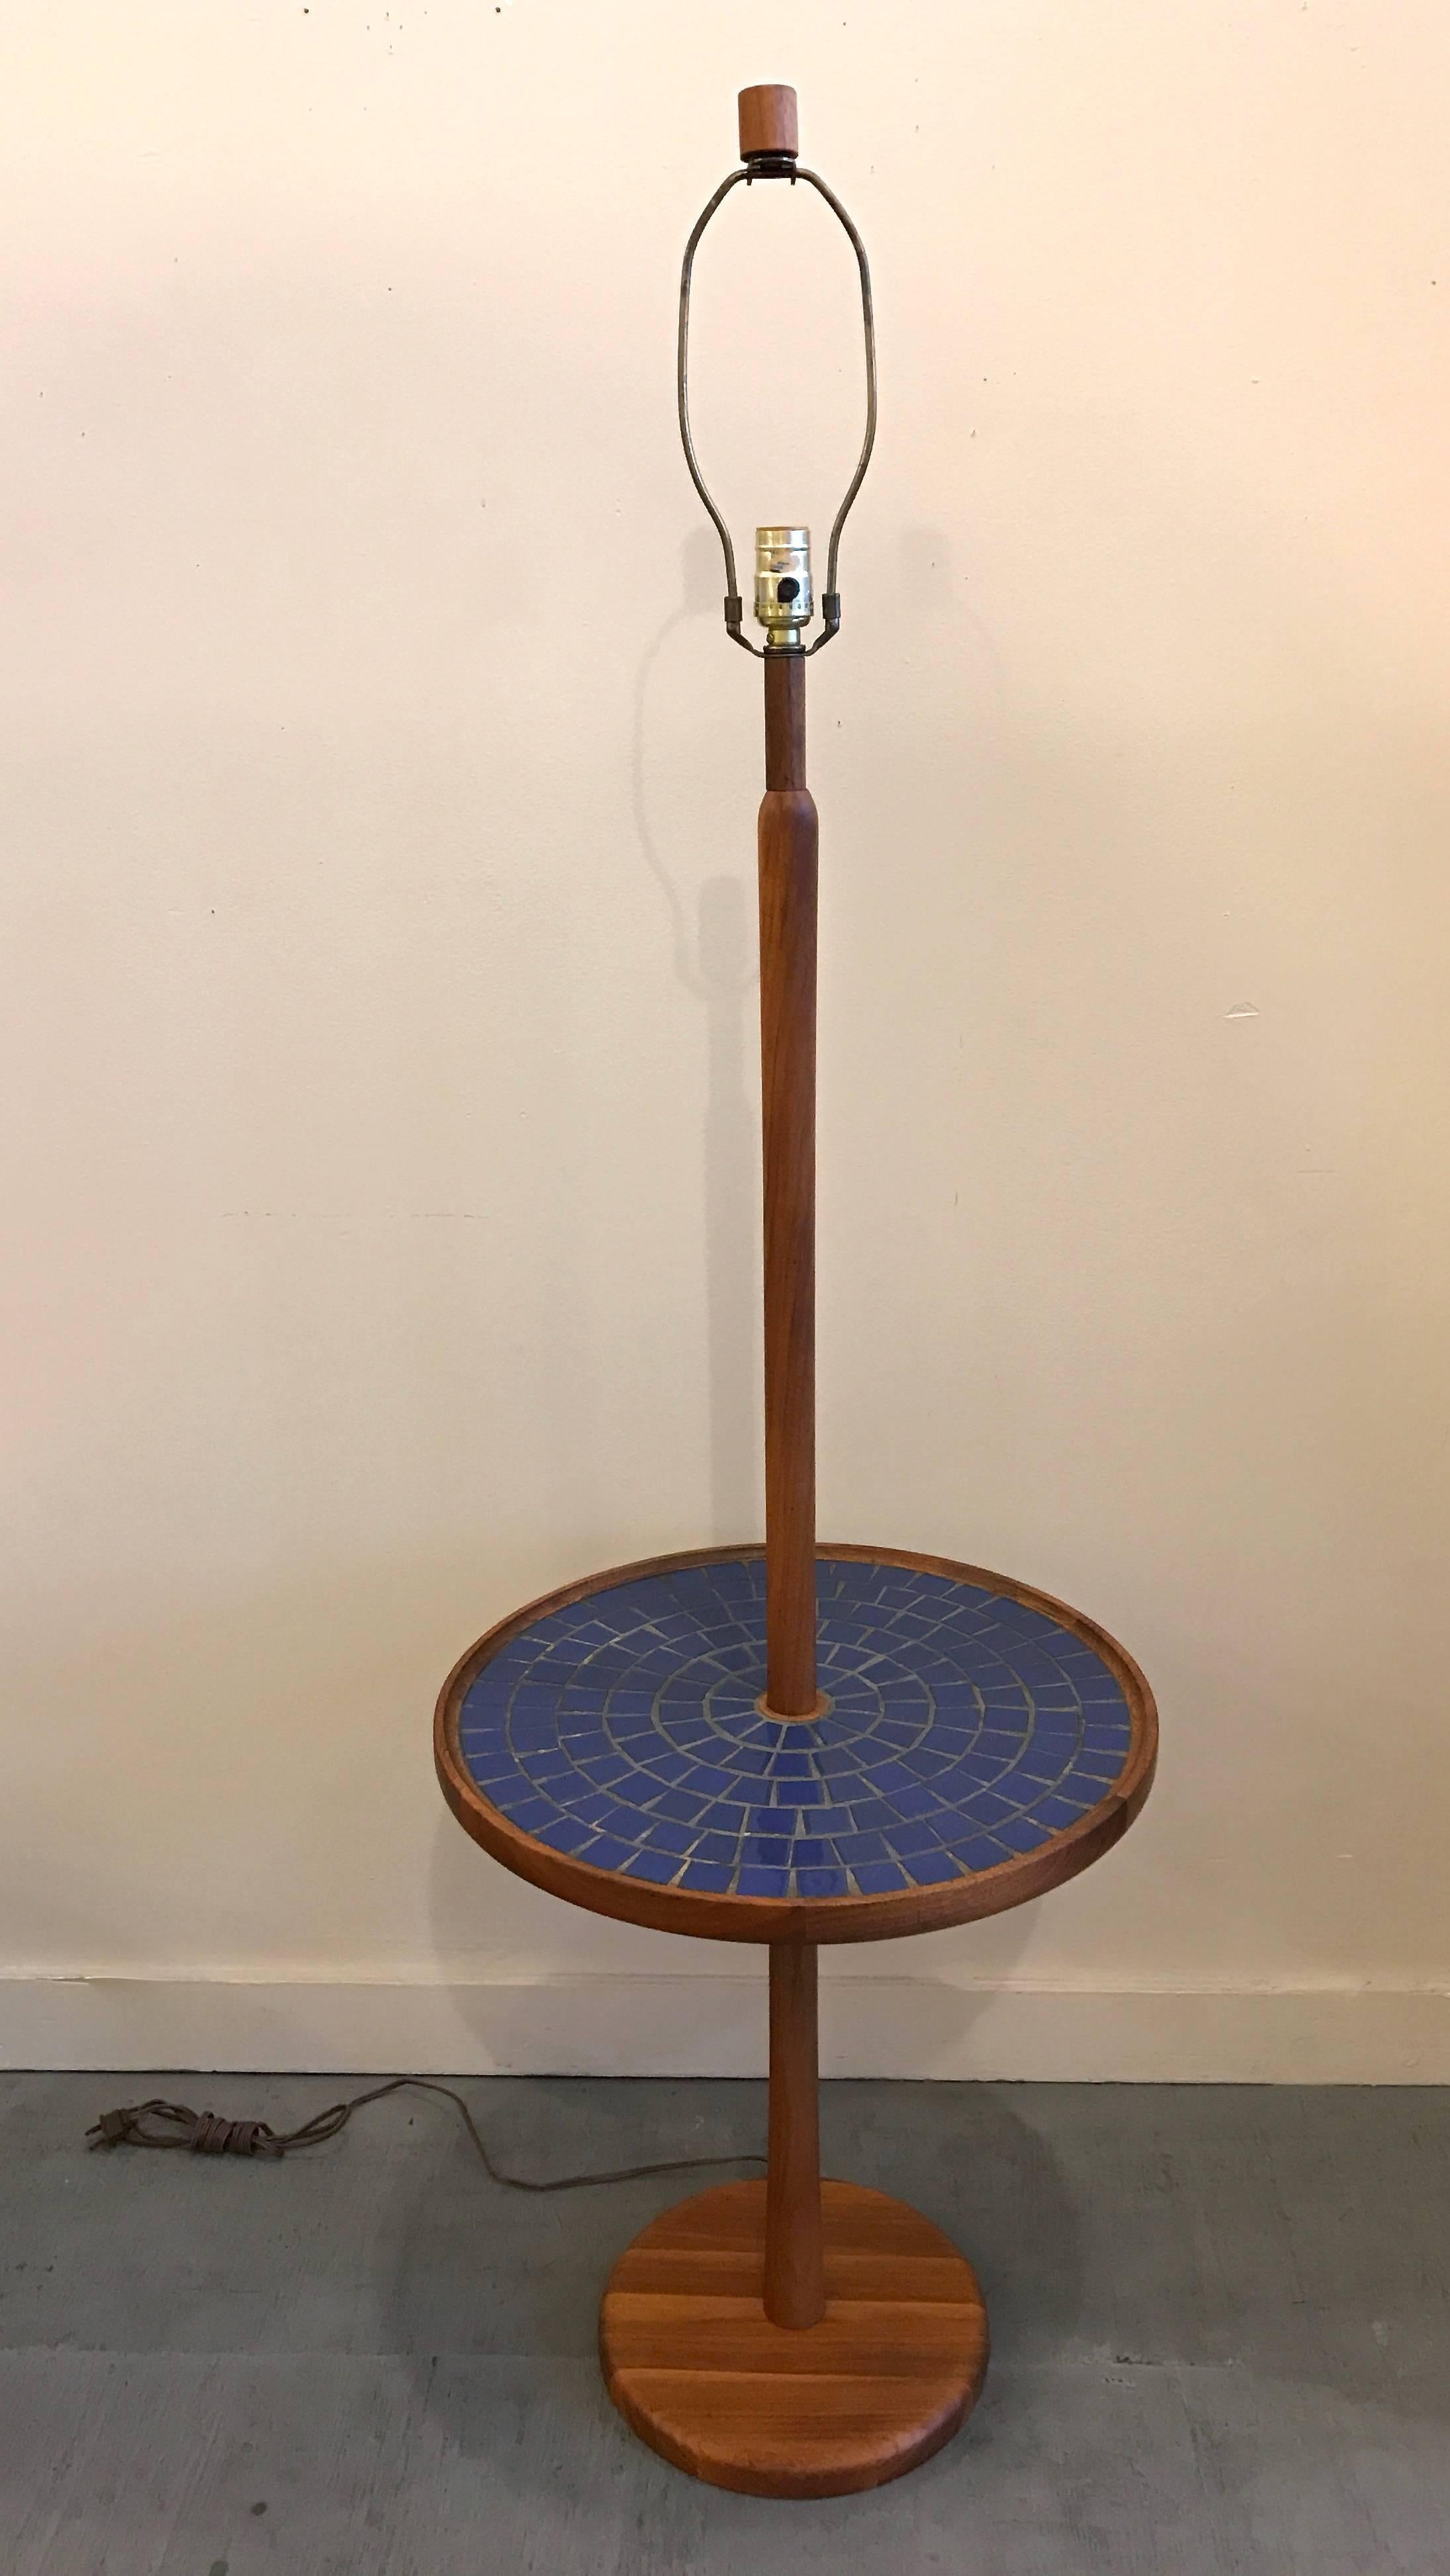 Walnut Marshall Studios / Jane and Gordon Martz design circular top table with blue square tile floor lamp, circa 1960s. In excellent vintage condition with freshly oiled walnut and redone electronics. Marshall Studios started in the 1920s and in